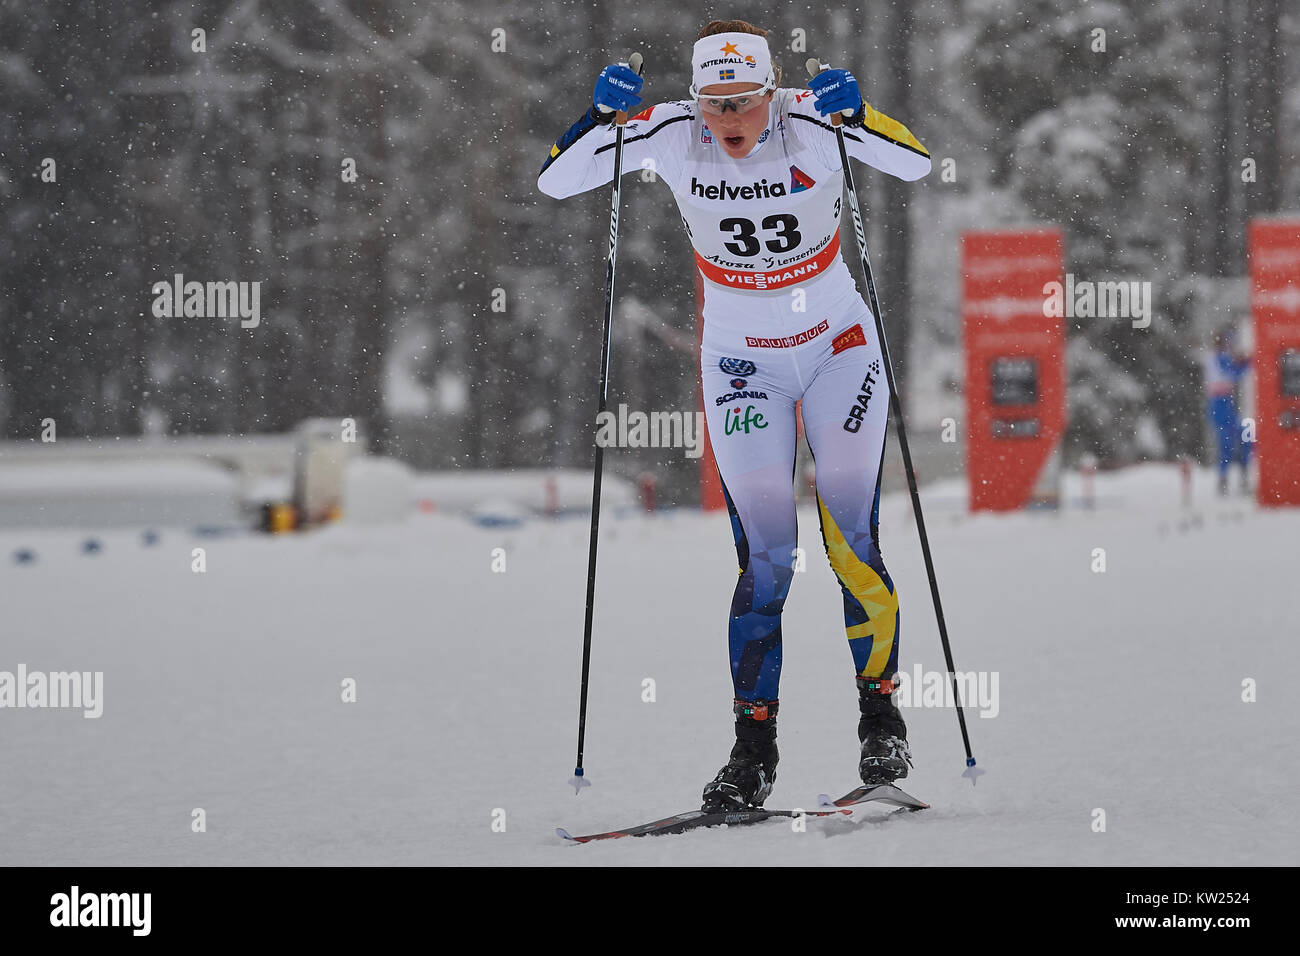 Lenzerheide, Switzerland, 30th December 2017. NORDSTROEM Maria (SWE) during the Ladies’ 1.5 km Sprint Competition at the FIS Cross Country Worldcup Tour de Ski 2017 in Lenzerheide. © Rolf Simeon/Proclaim/Alamy Live News Stock Photo